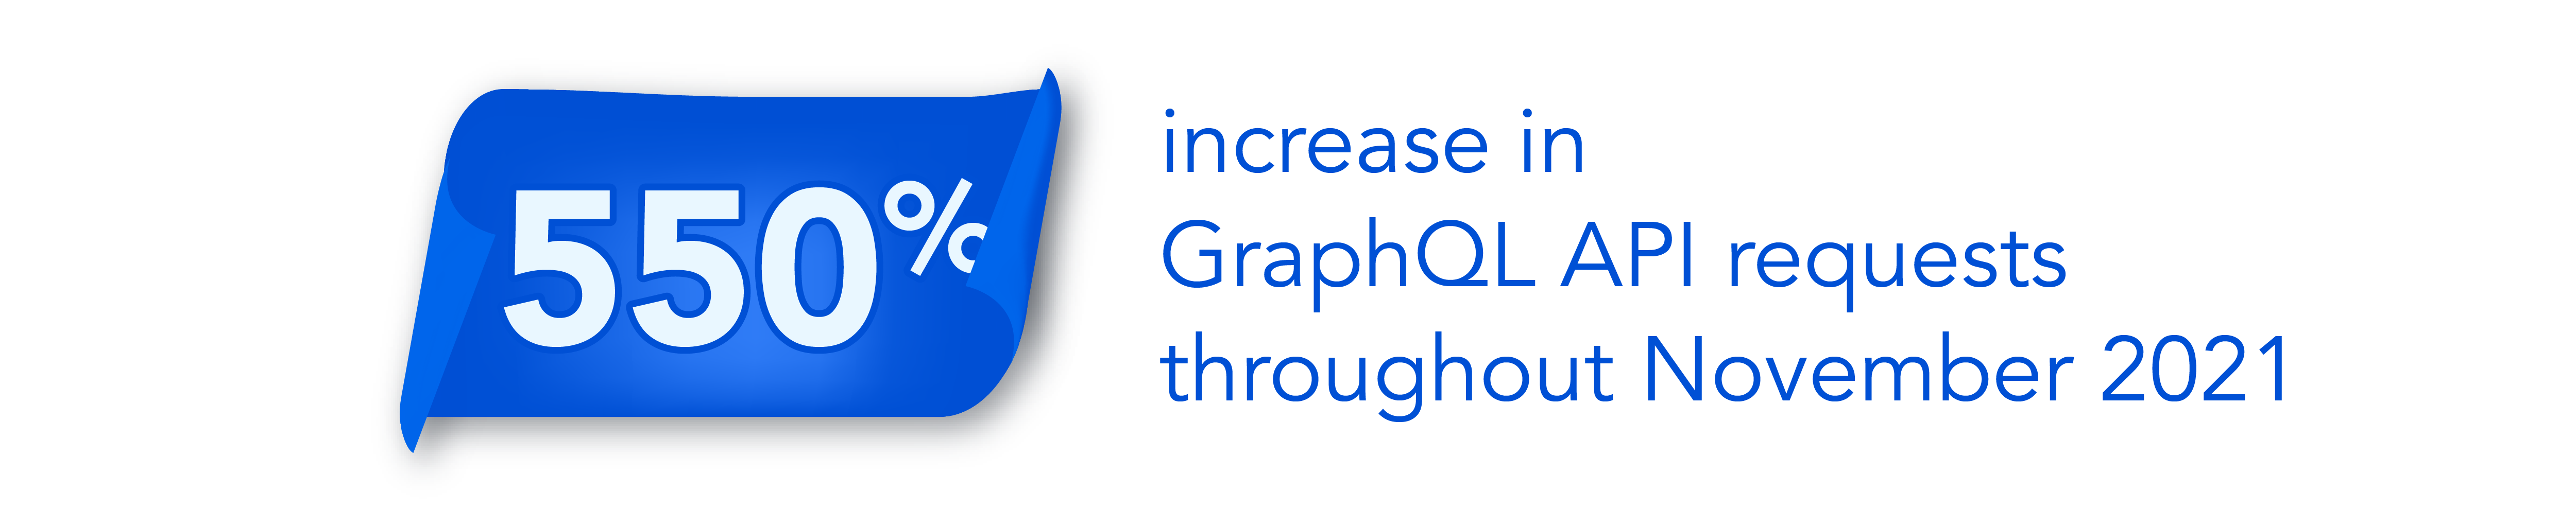 550% increase in GraphQL API requests throughout November 2021

